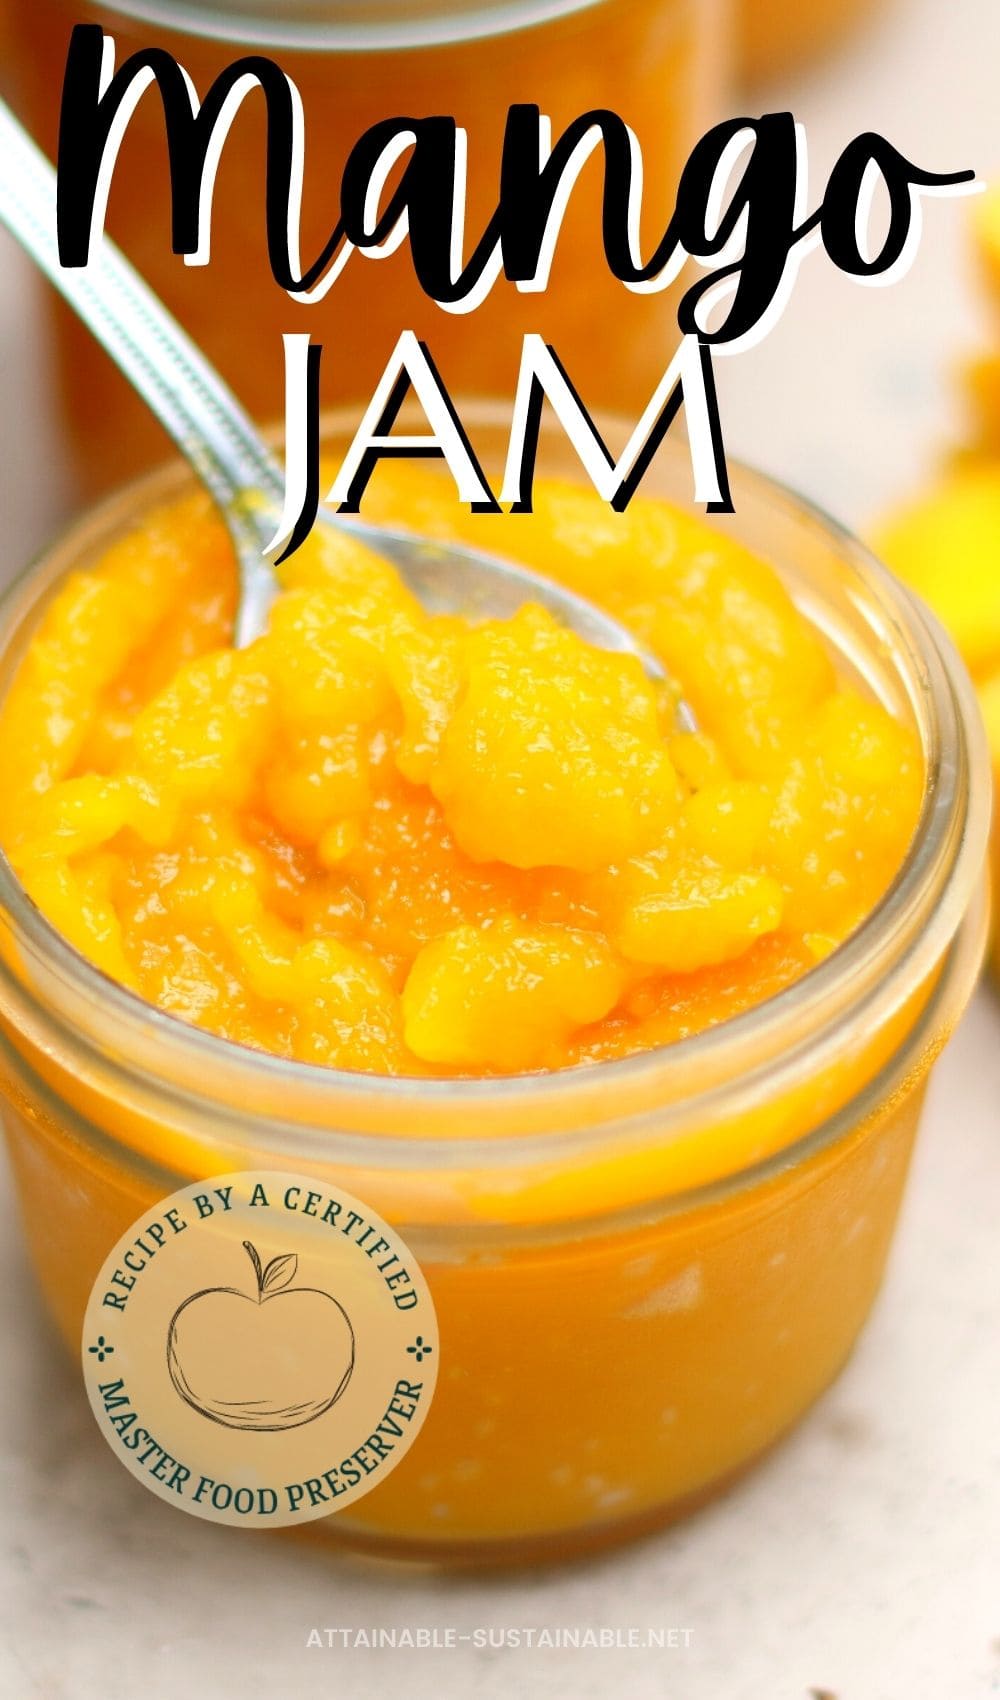 spoon in a jar of bright yellow jam in a canning jar